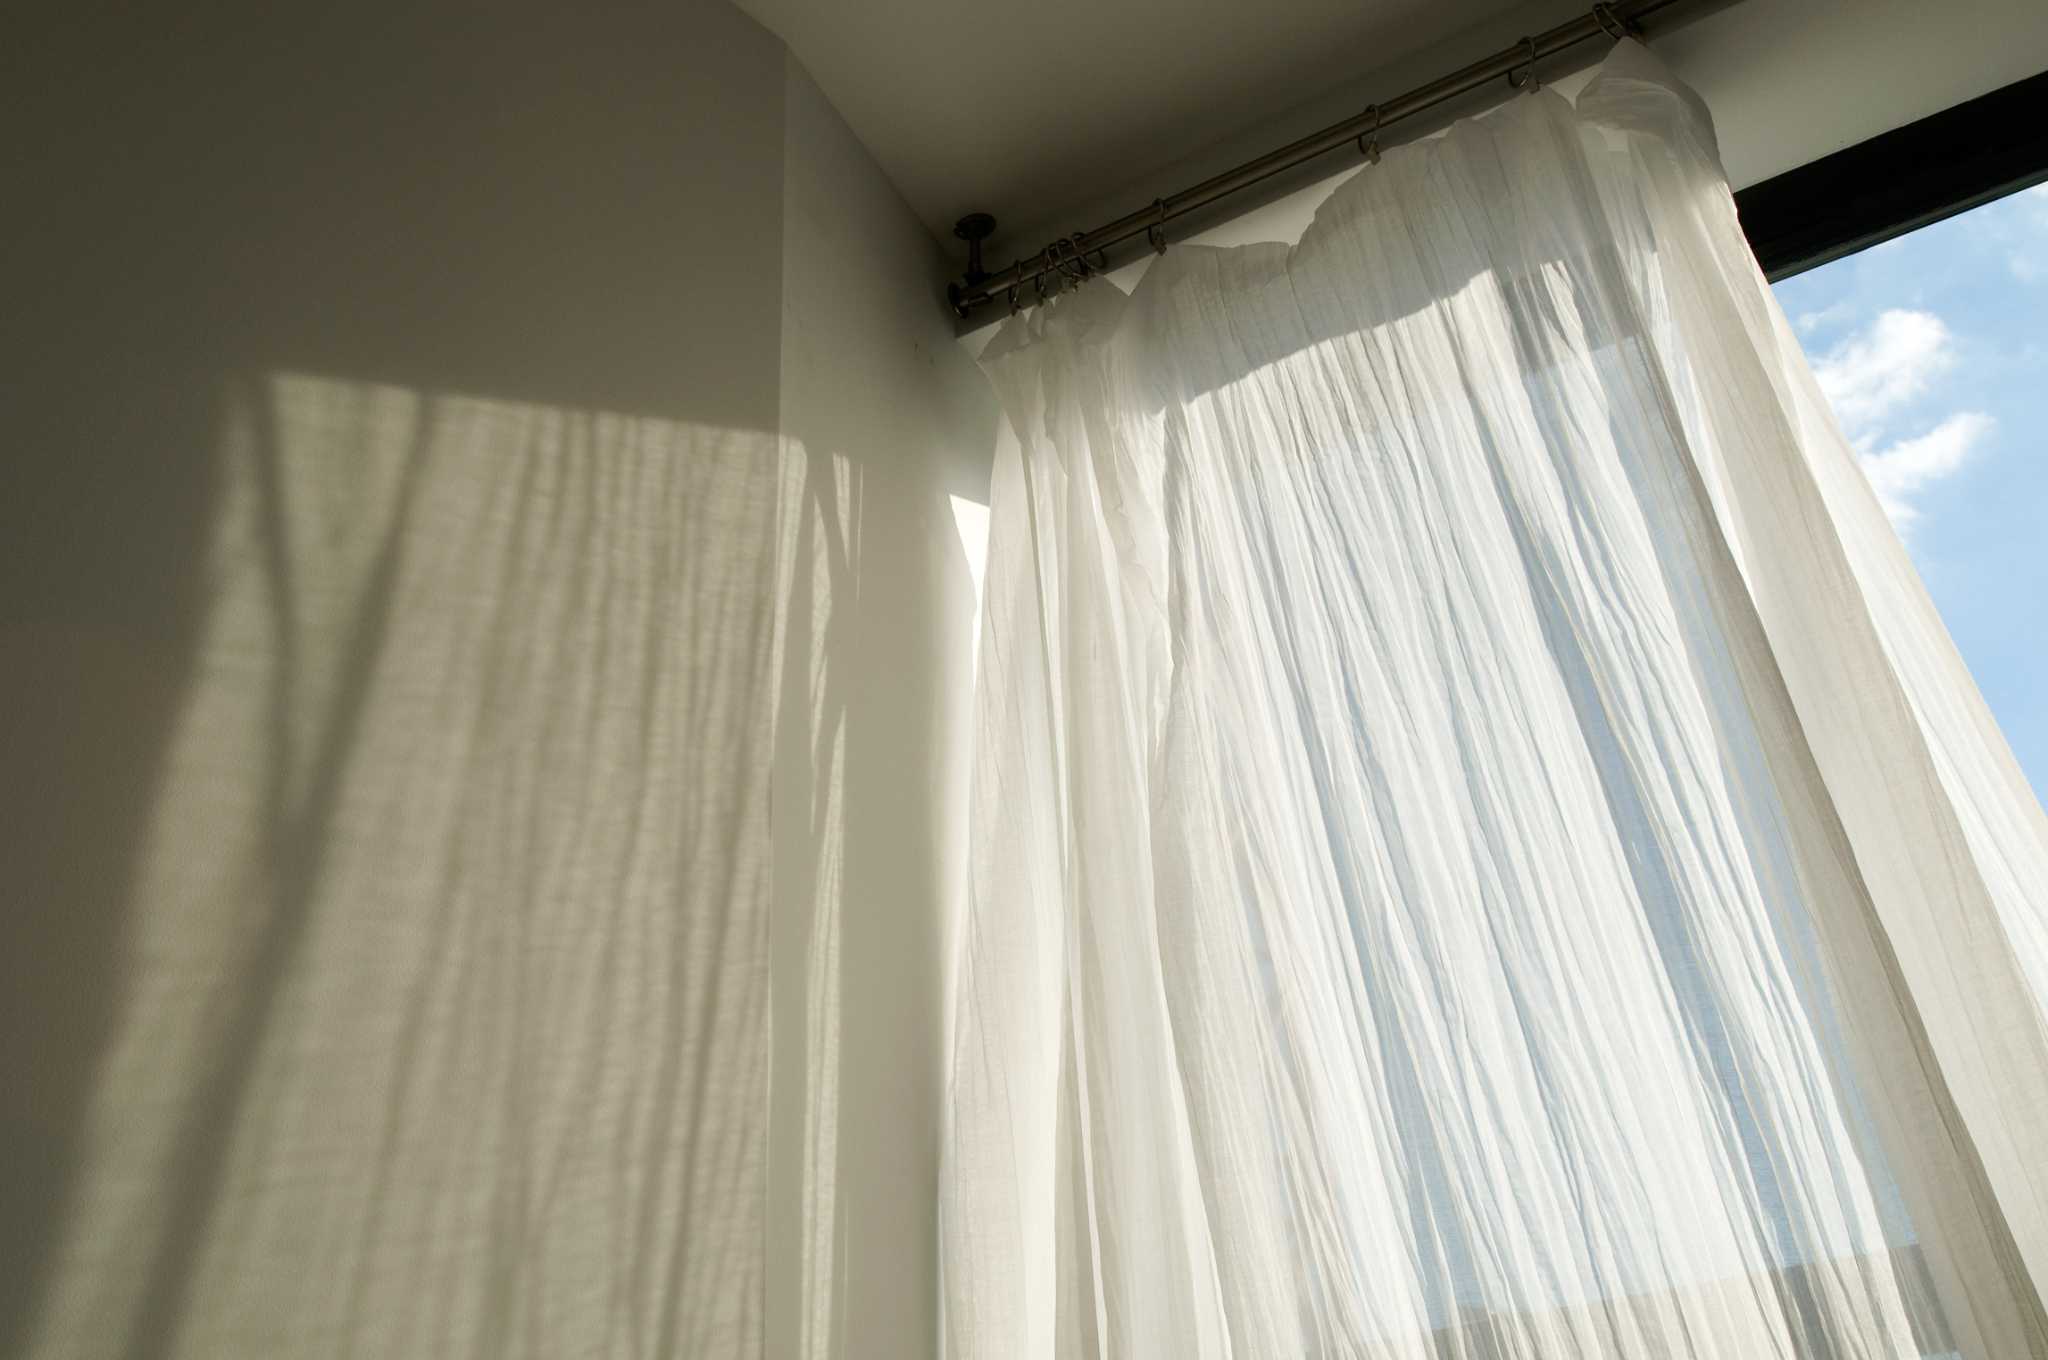 How To Get Wrinkles Out Of New Drapes